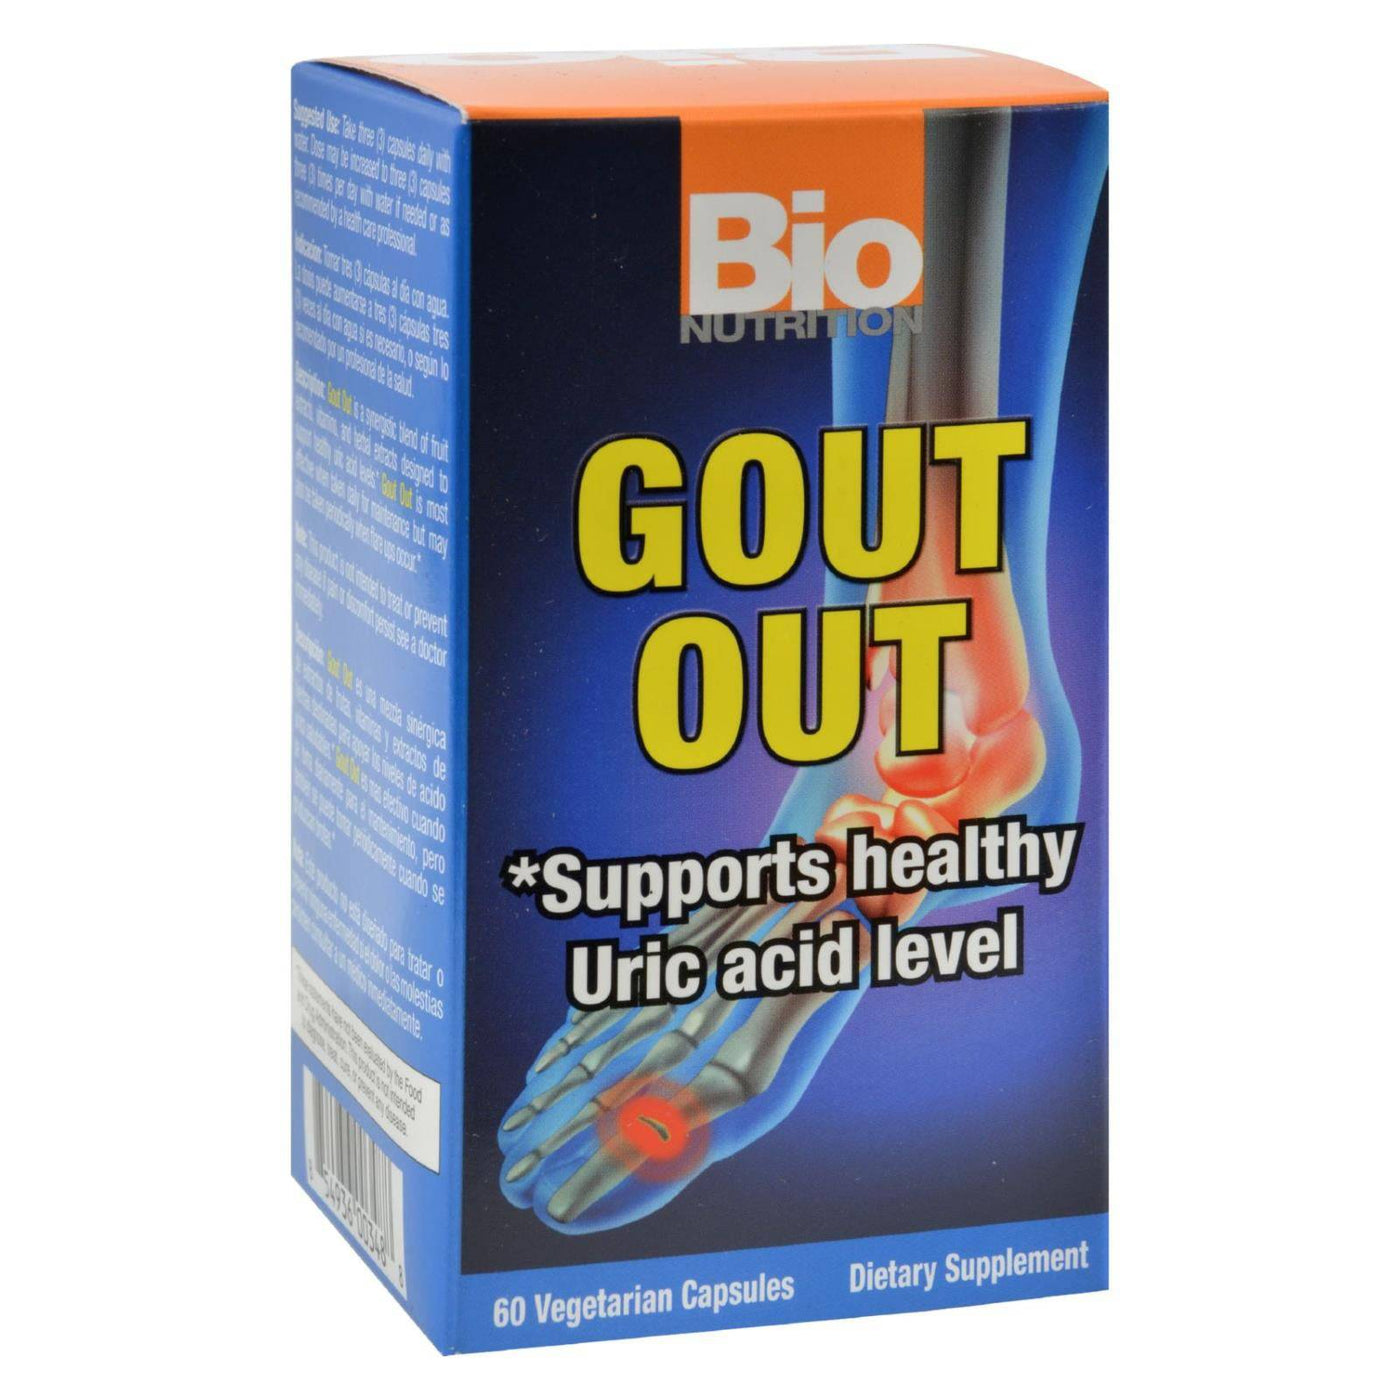 Buy Bio Nutrition - Gout Out - 60 Vegetarian Capsules  at OnlyNaturals.us